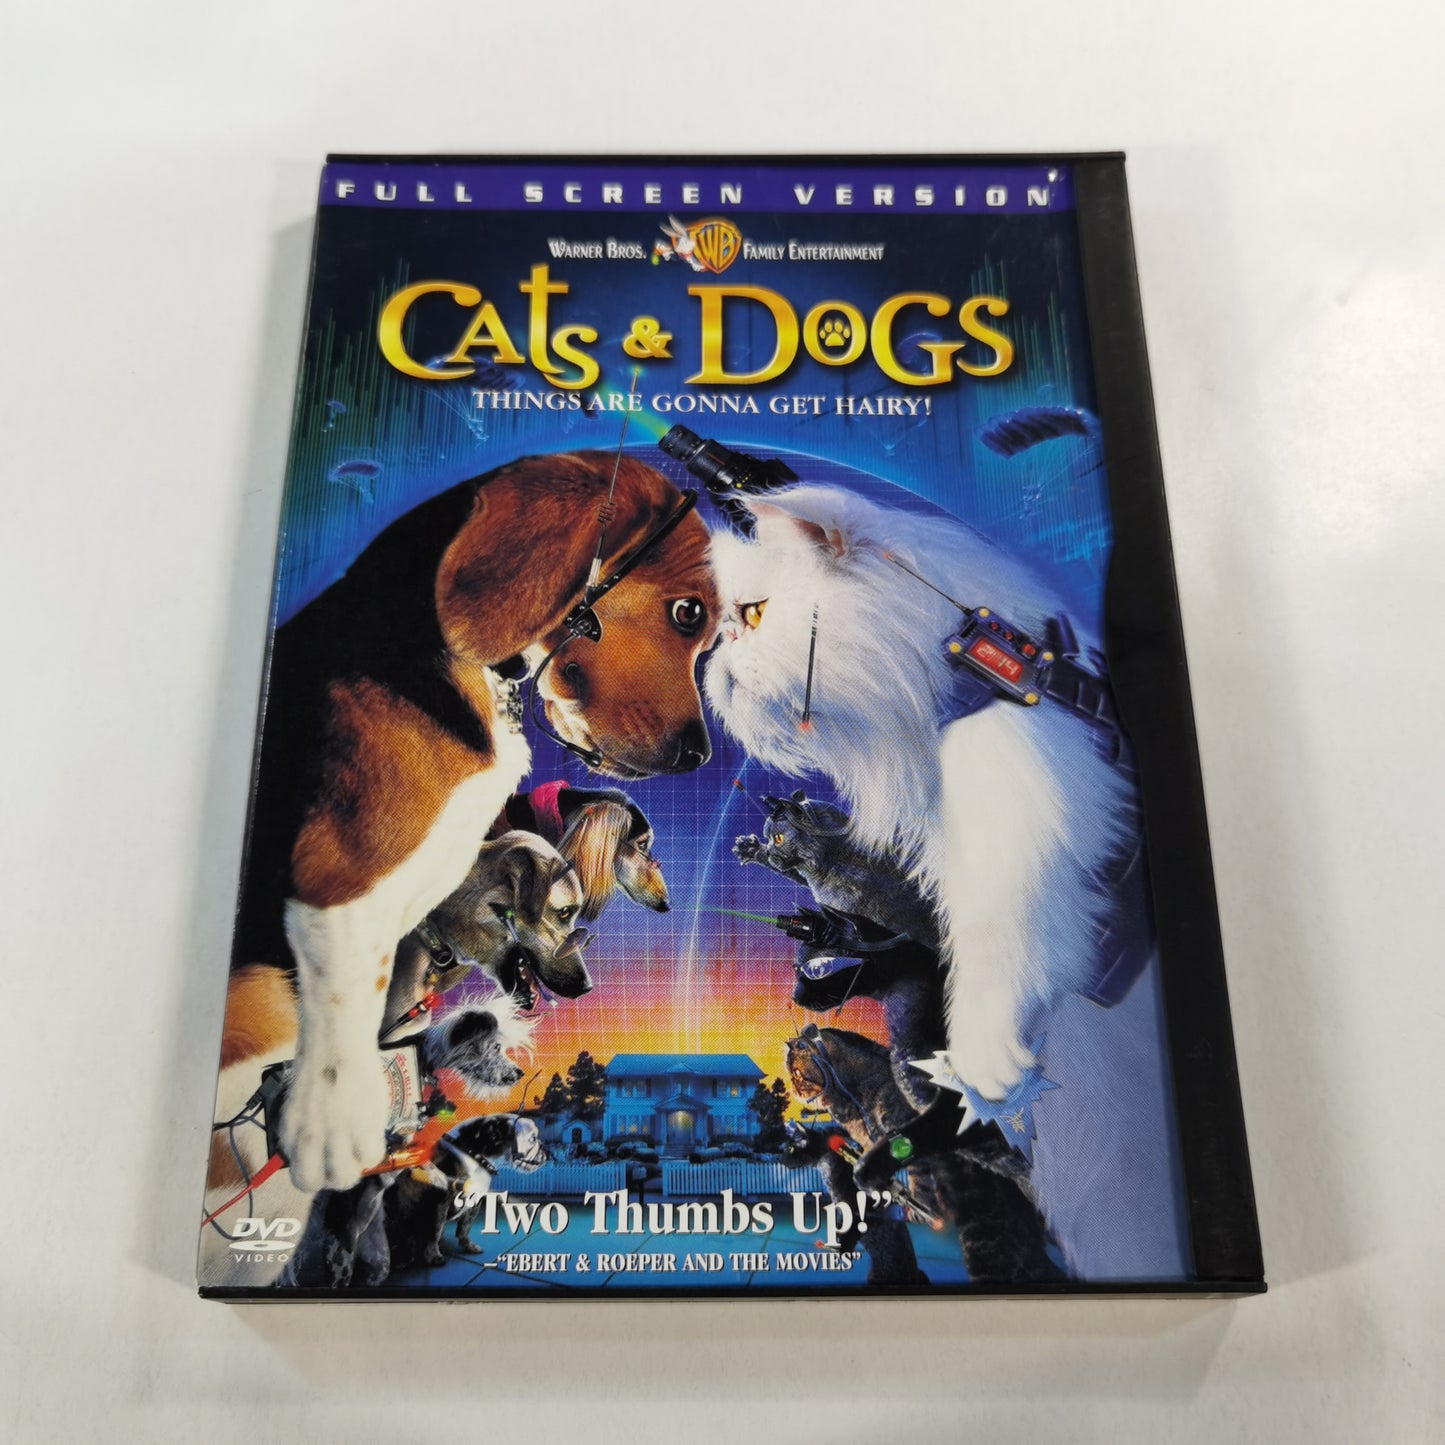 Cats & Dogs (2001) - DVD US 2001 Snap Case